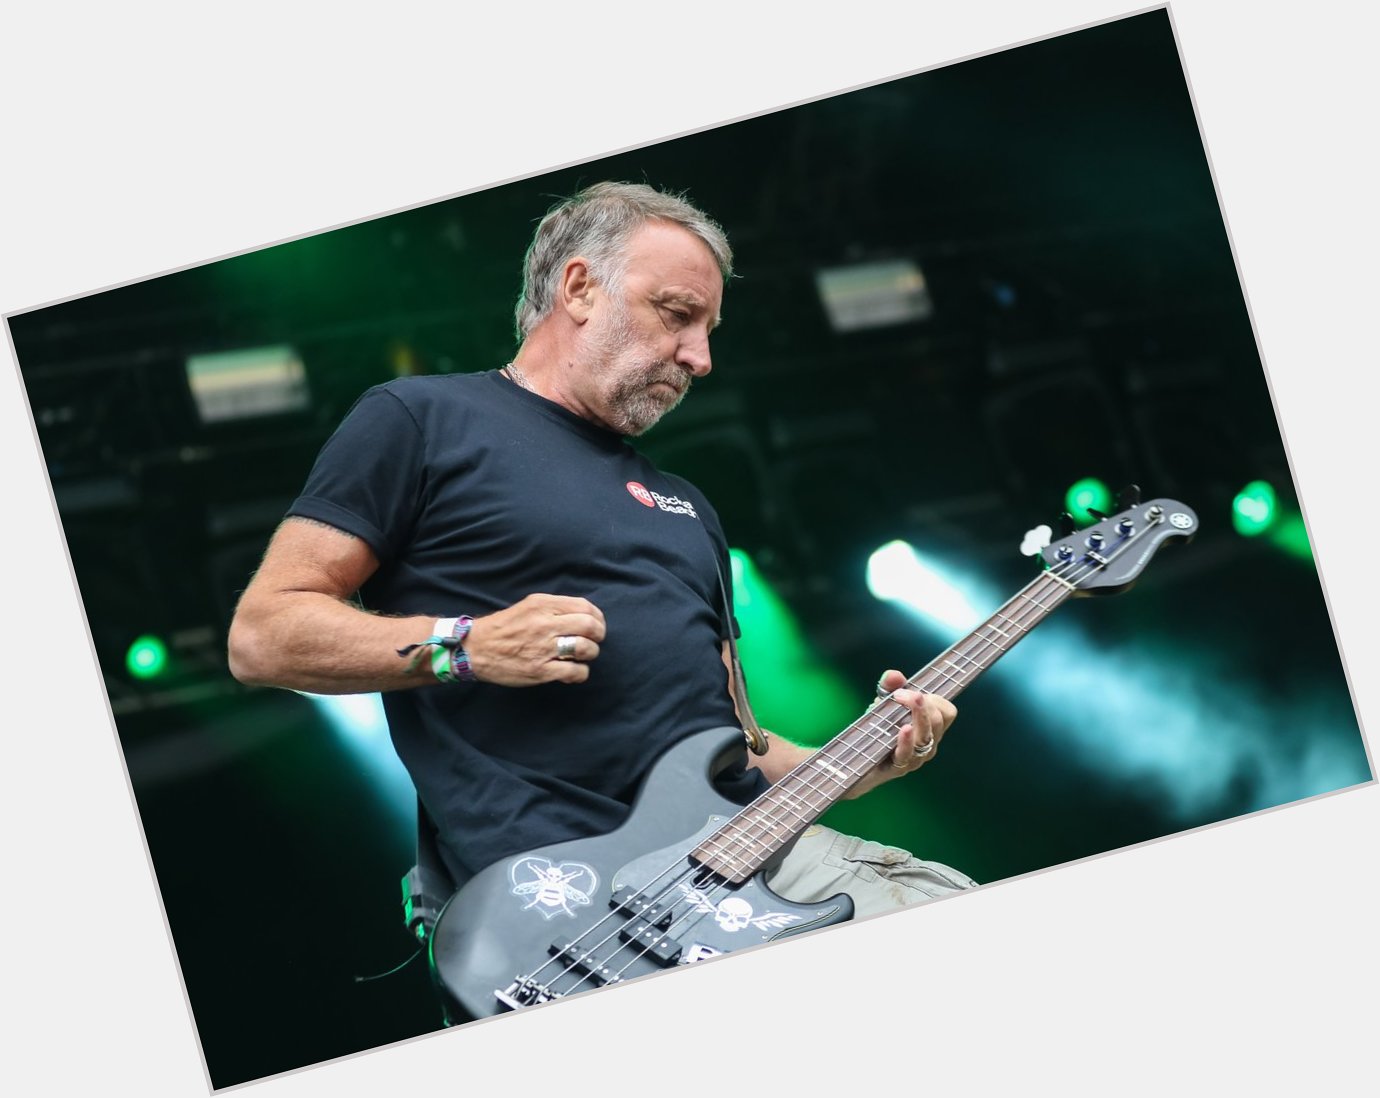 Please join me here at in wishing the one and only Peter Hook a very Happy 65th Birthday today  